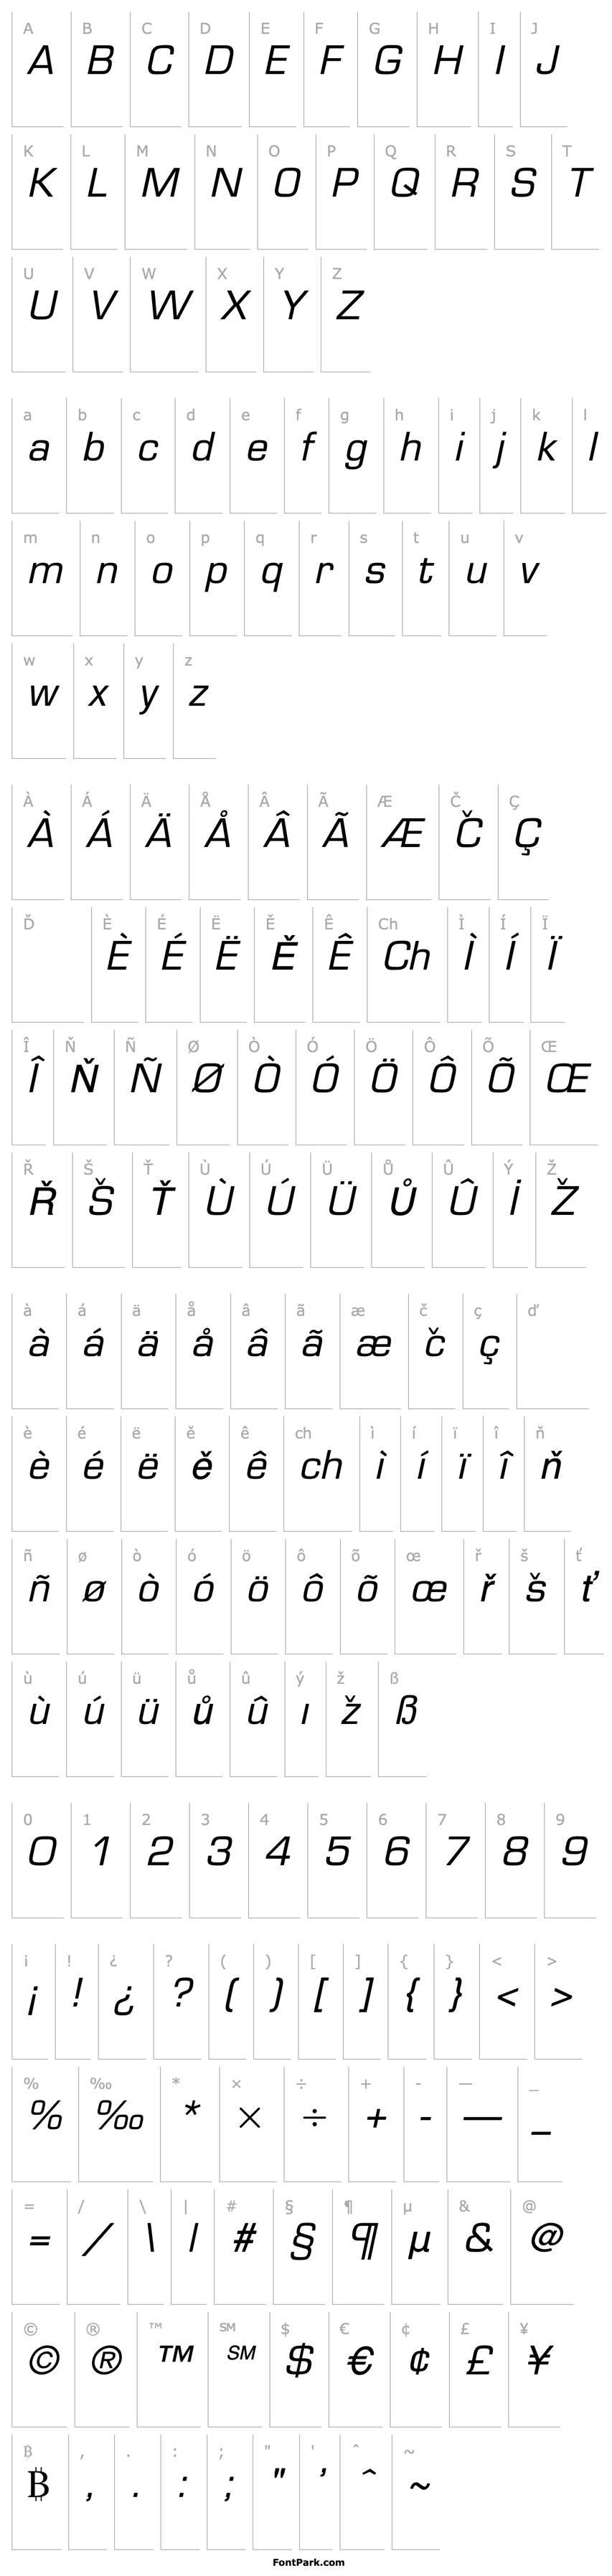 Overview Square 721 Italic BT